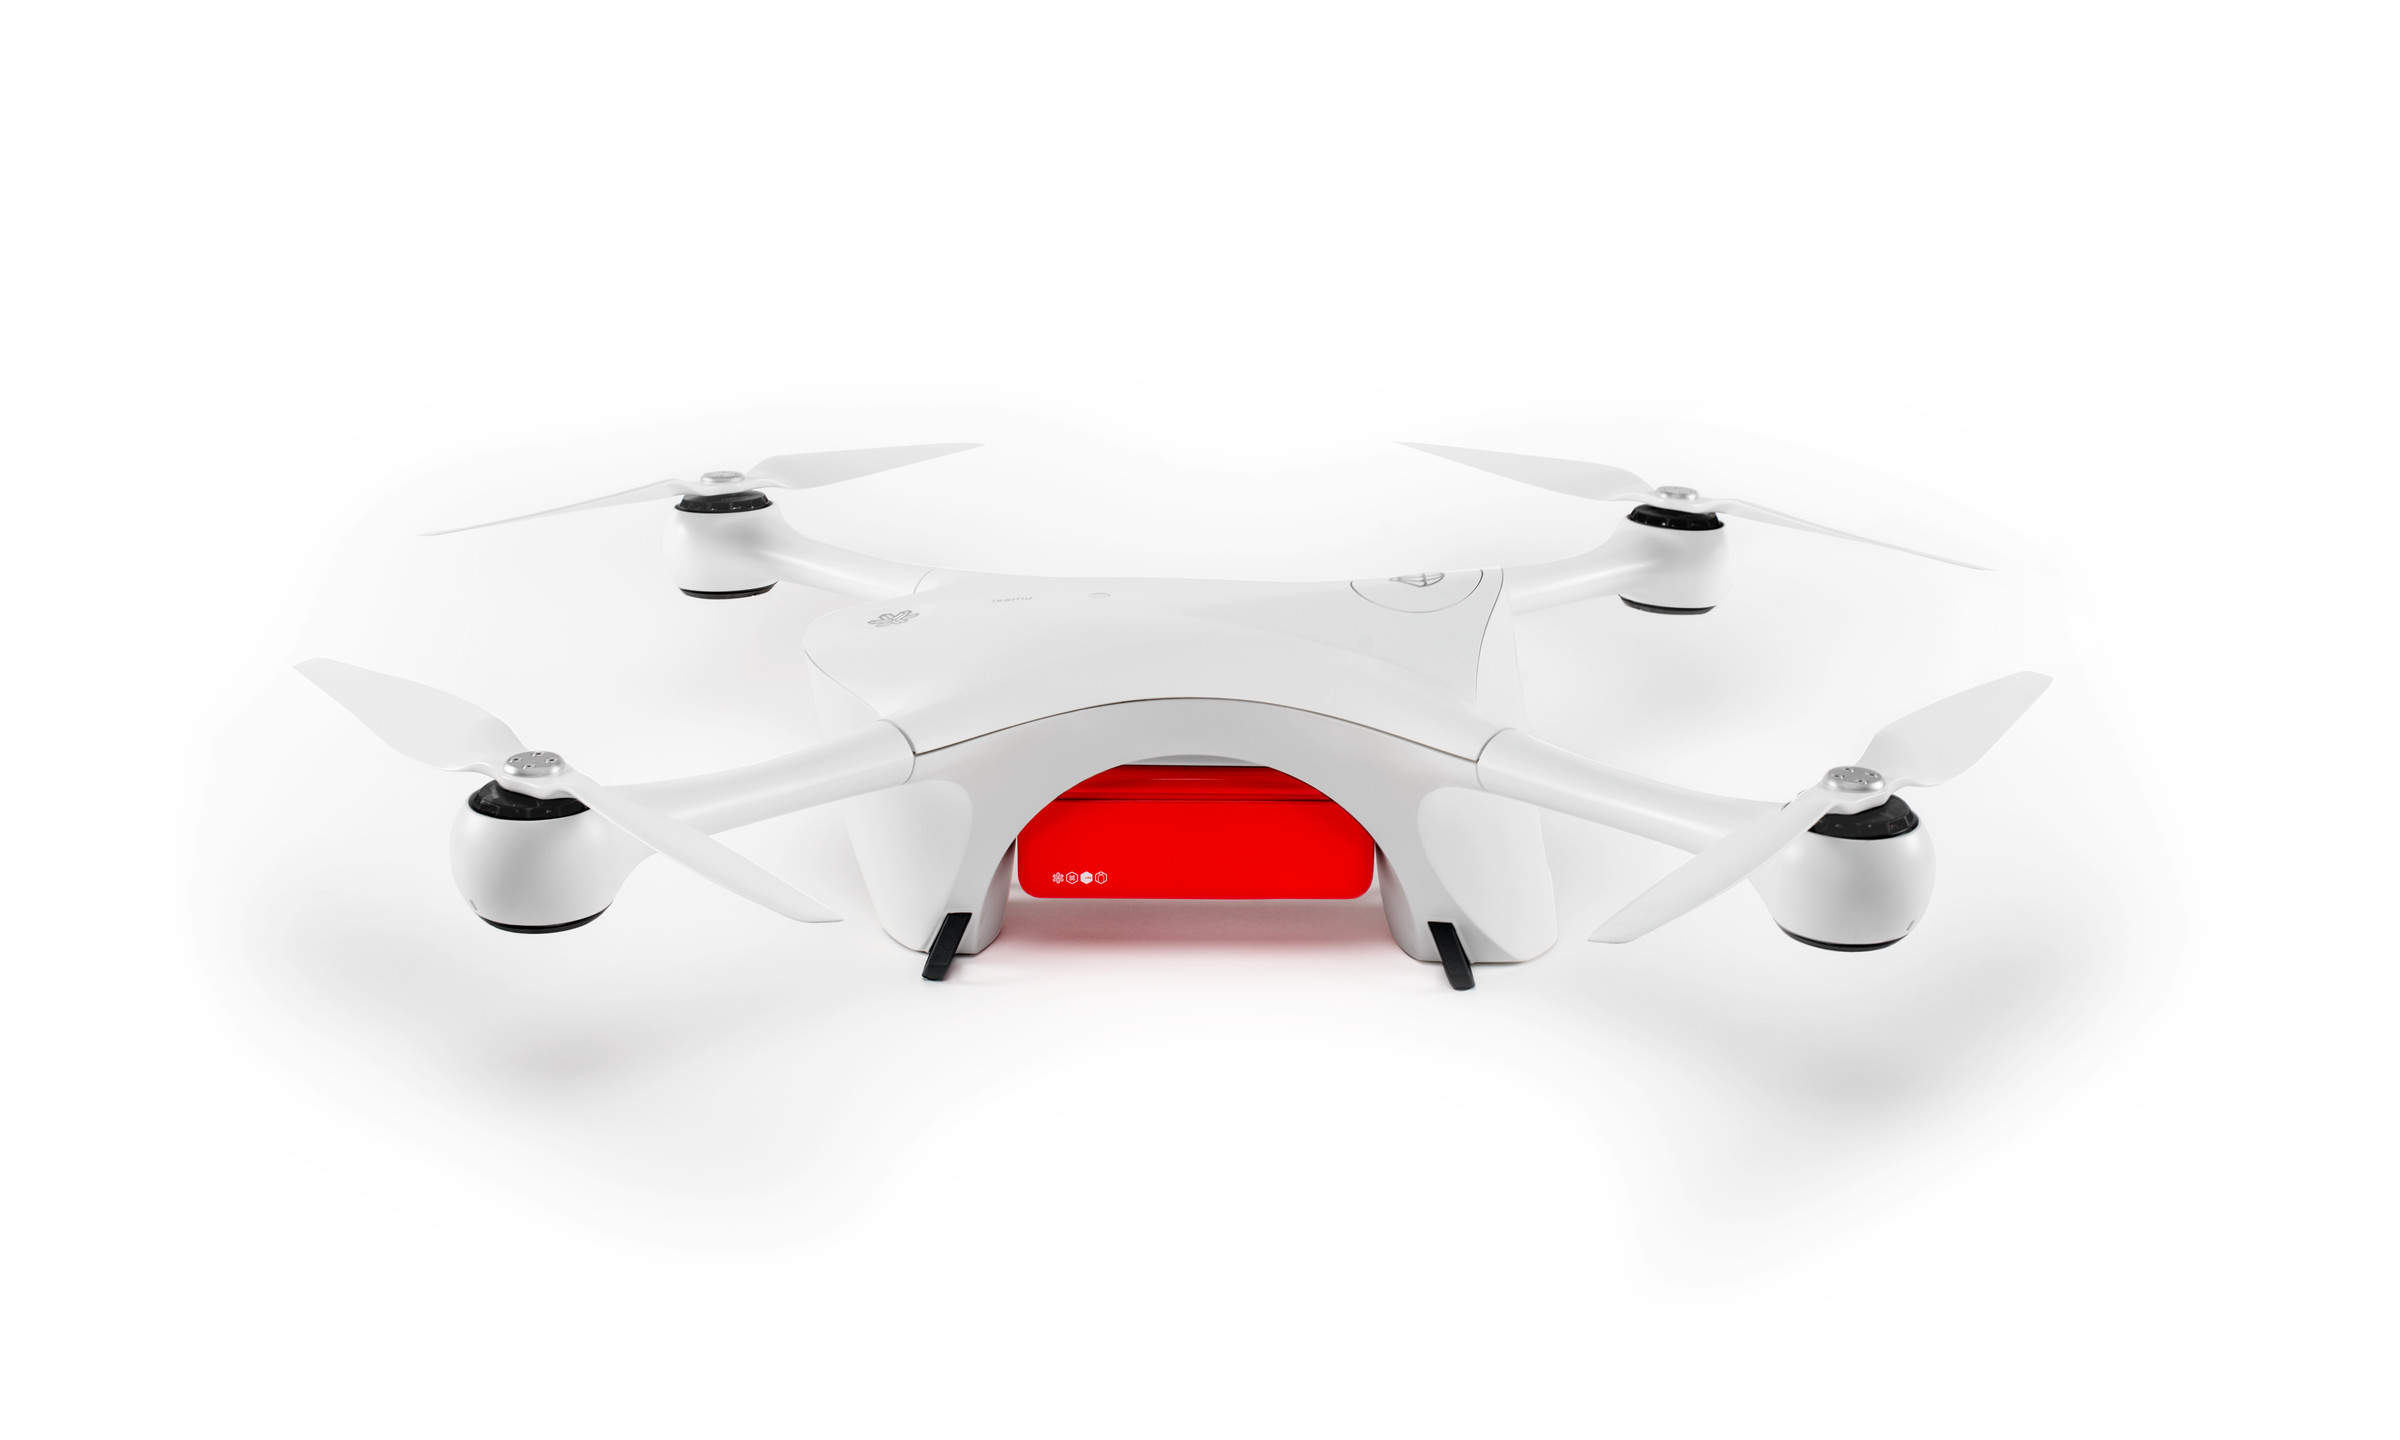 An image of Matternet’s M2 delivery drone on a white background